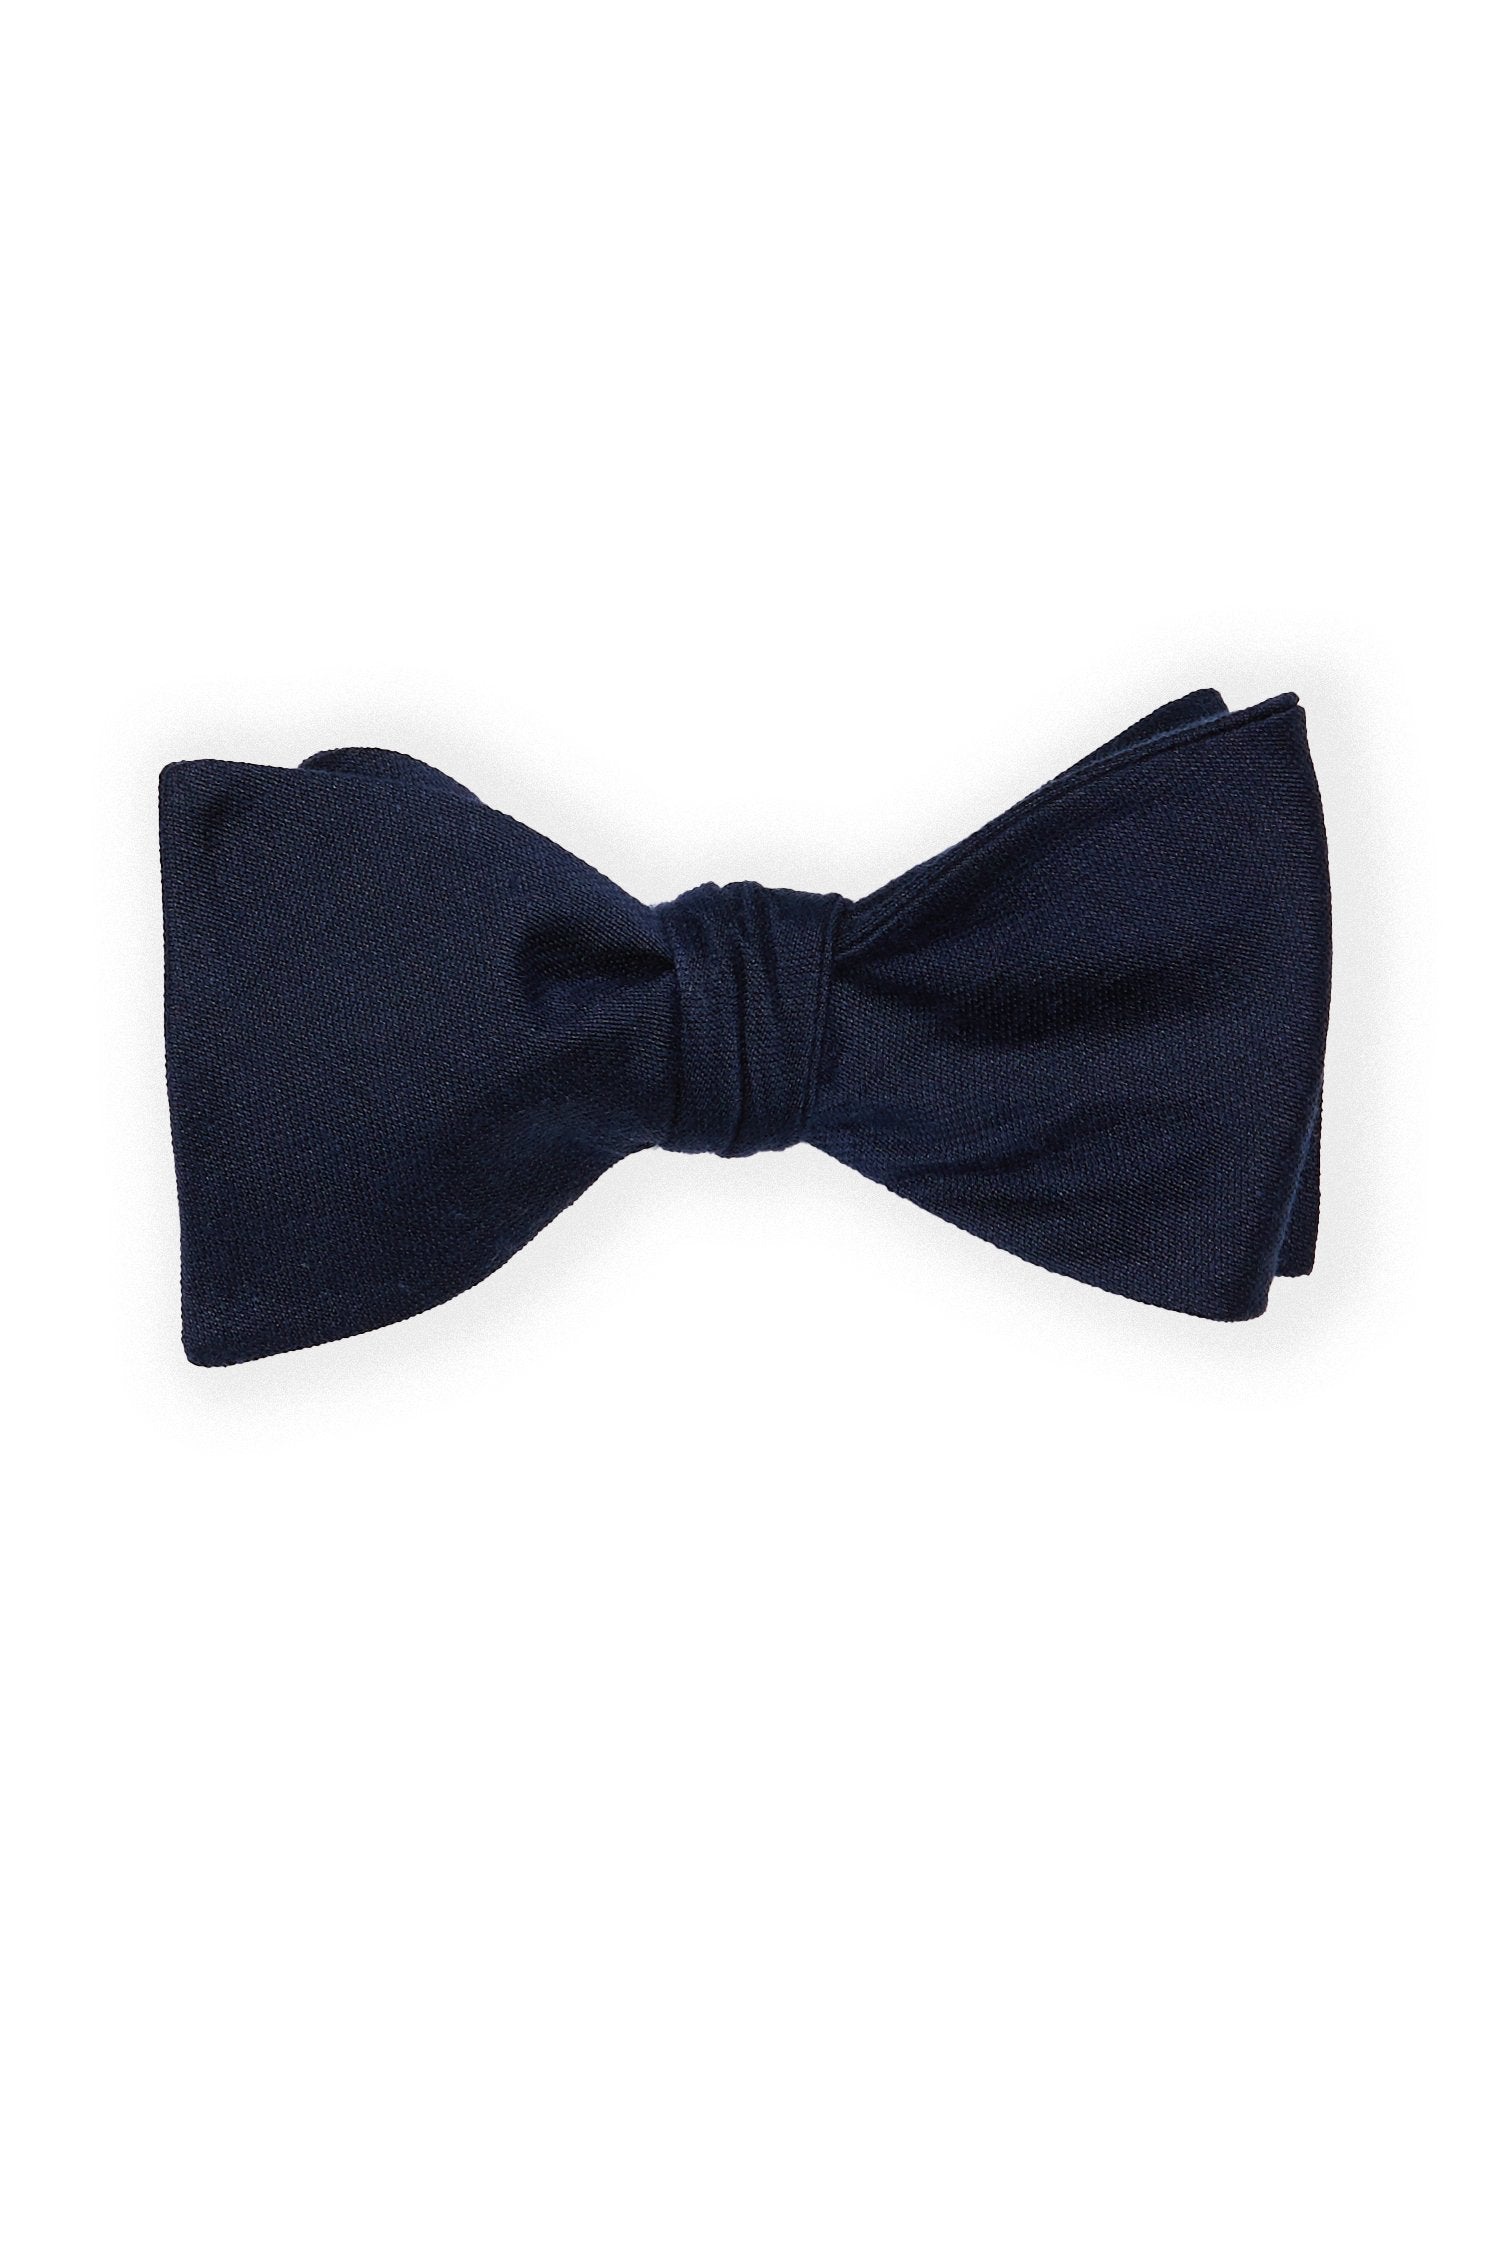 Daniel Bow Tie in navy by Birdy Grey, front view